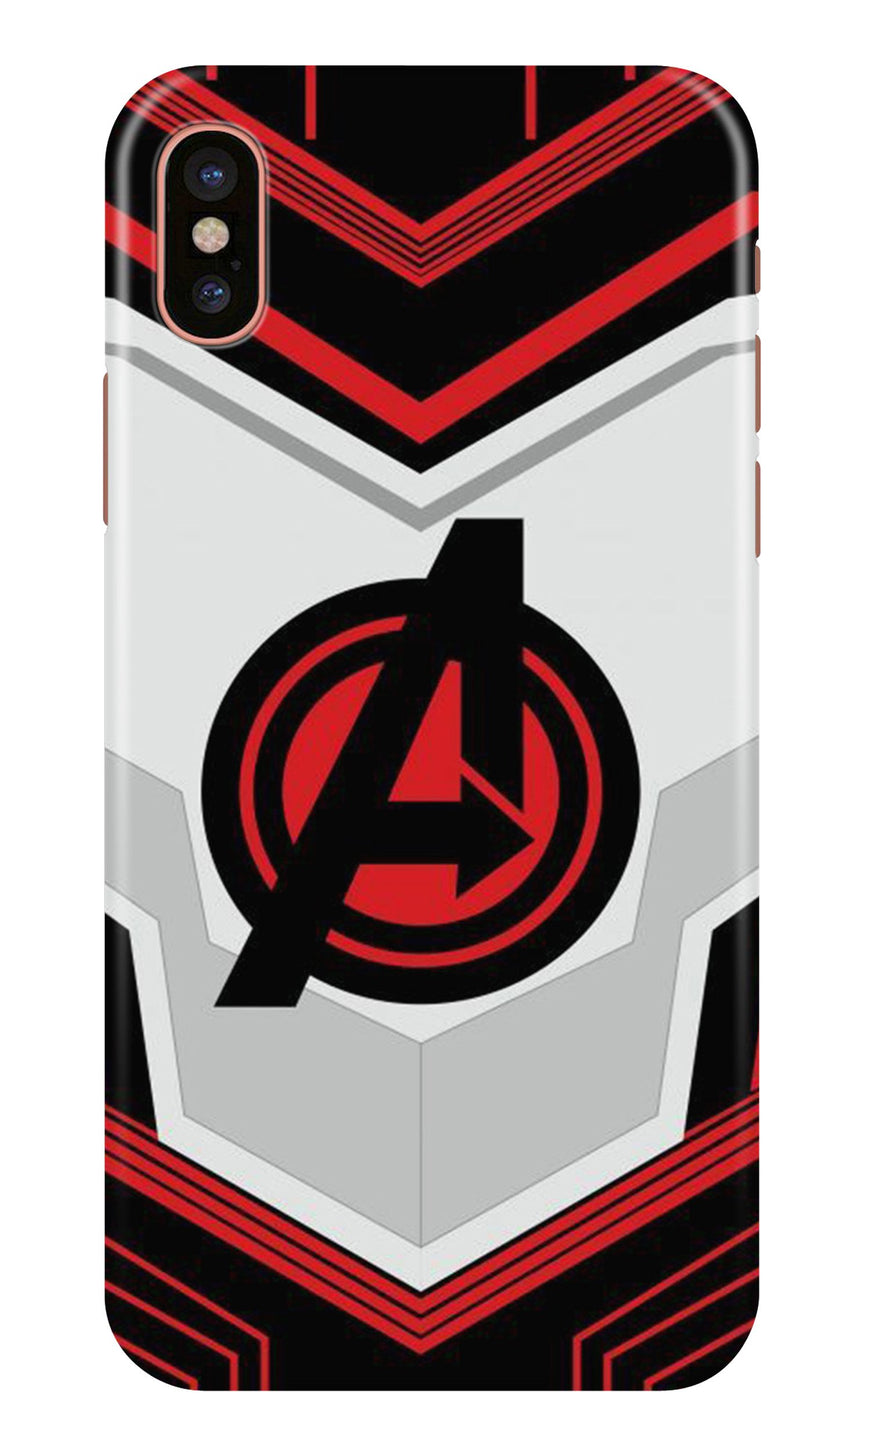 Avengers2 Case for iPhone X (Design No. 255)